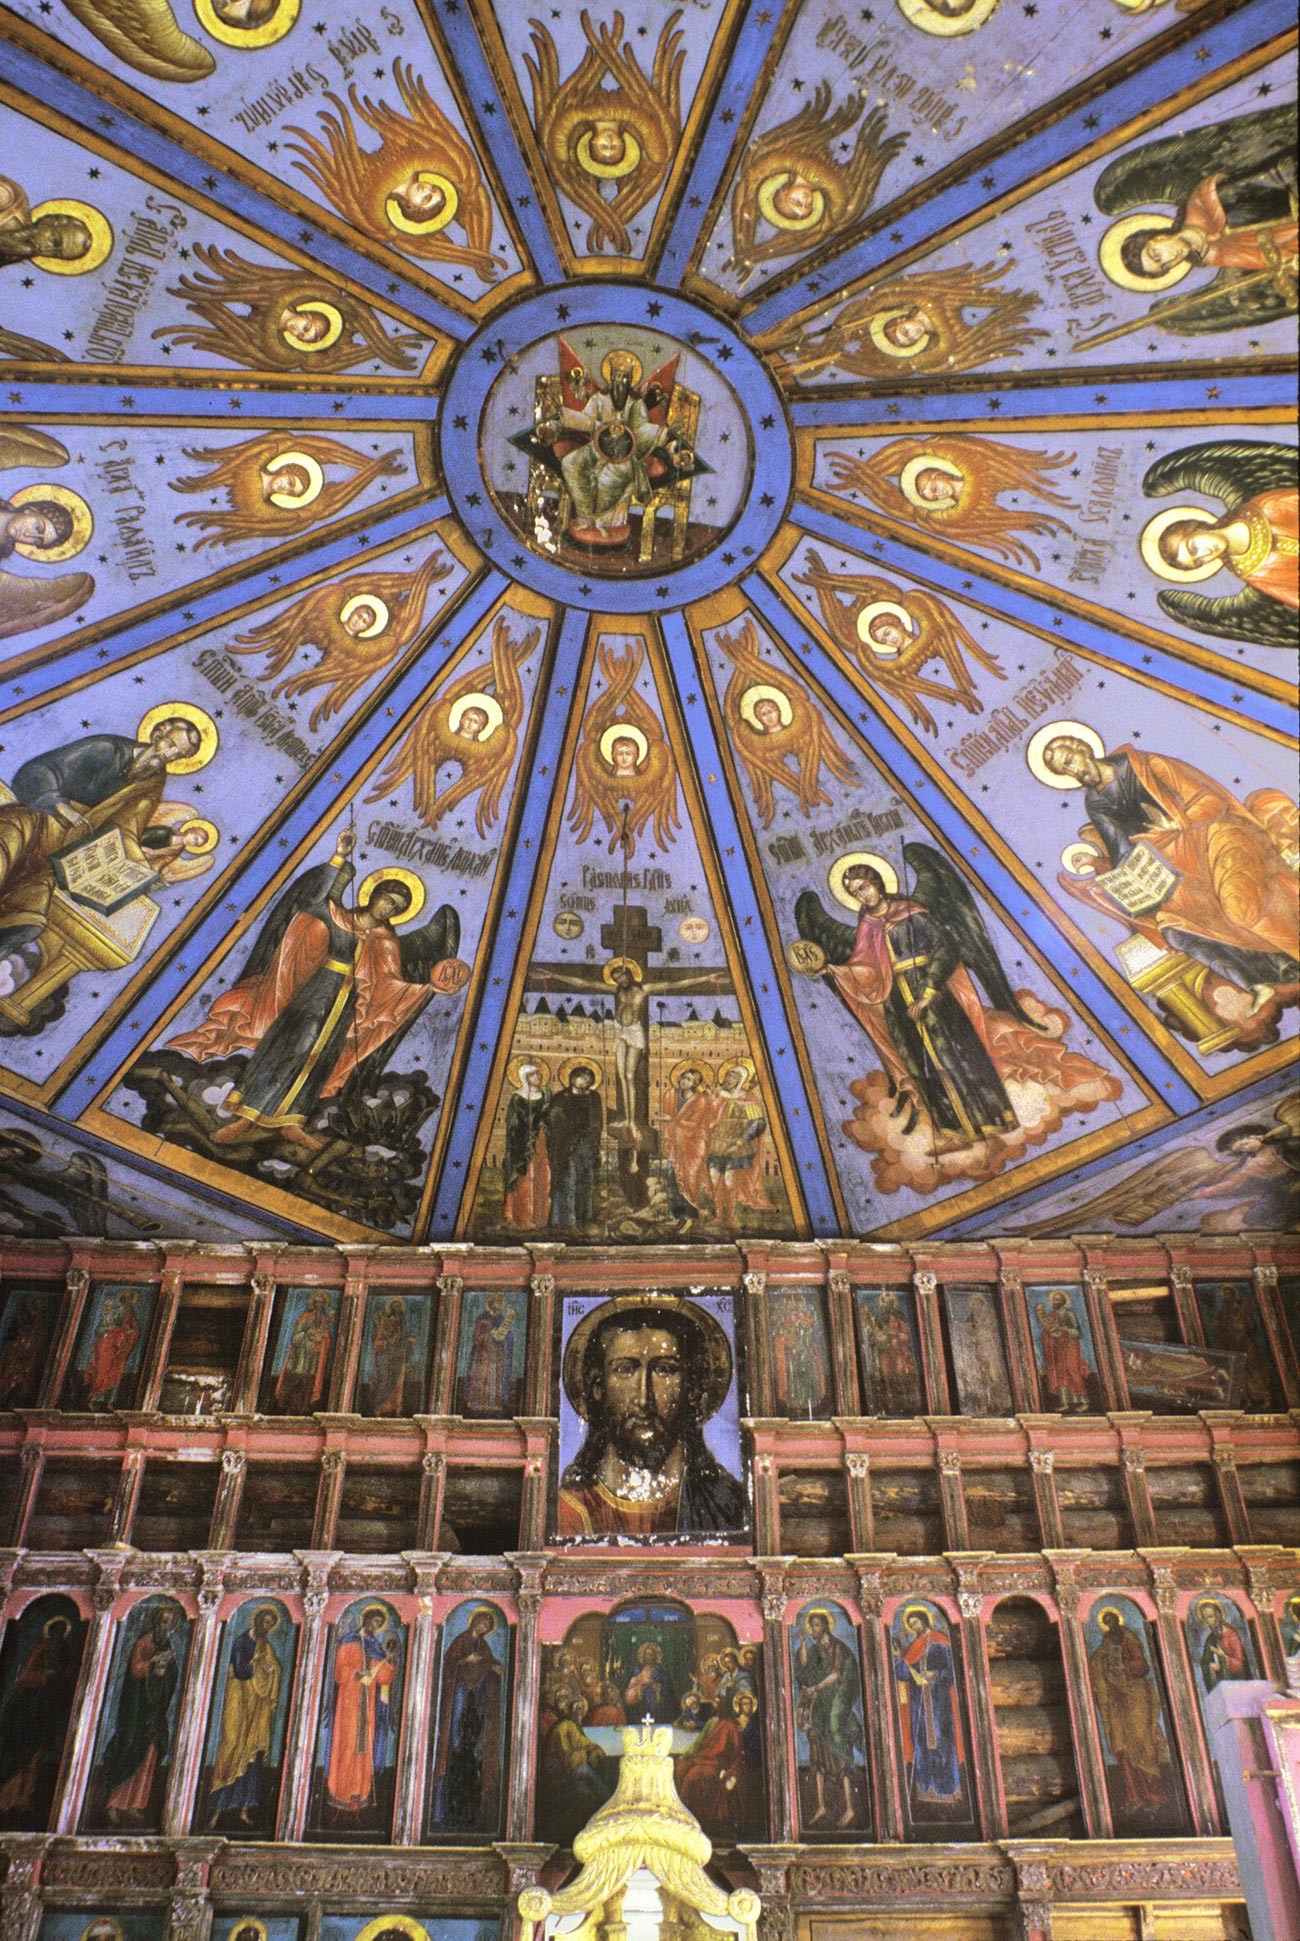  Lyadiny. Intercession Church. Icon screen & painted ceiling (nebo). July 29, 1998